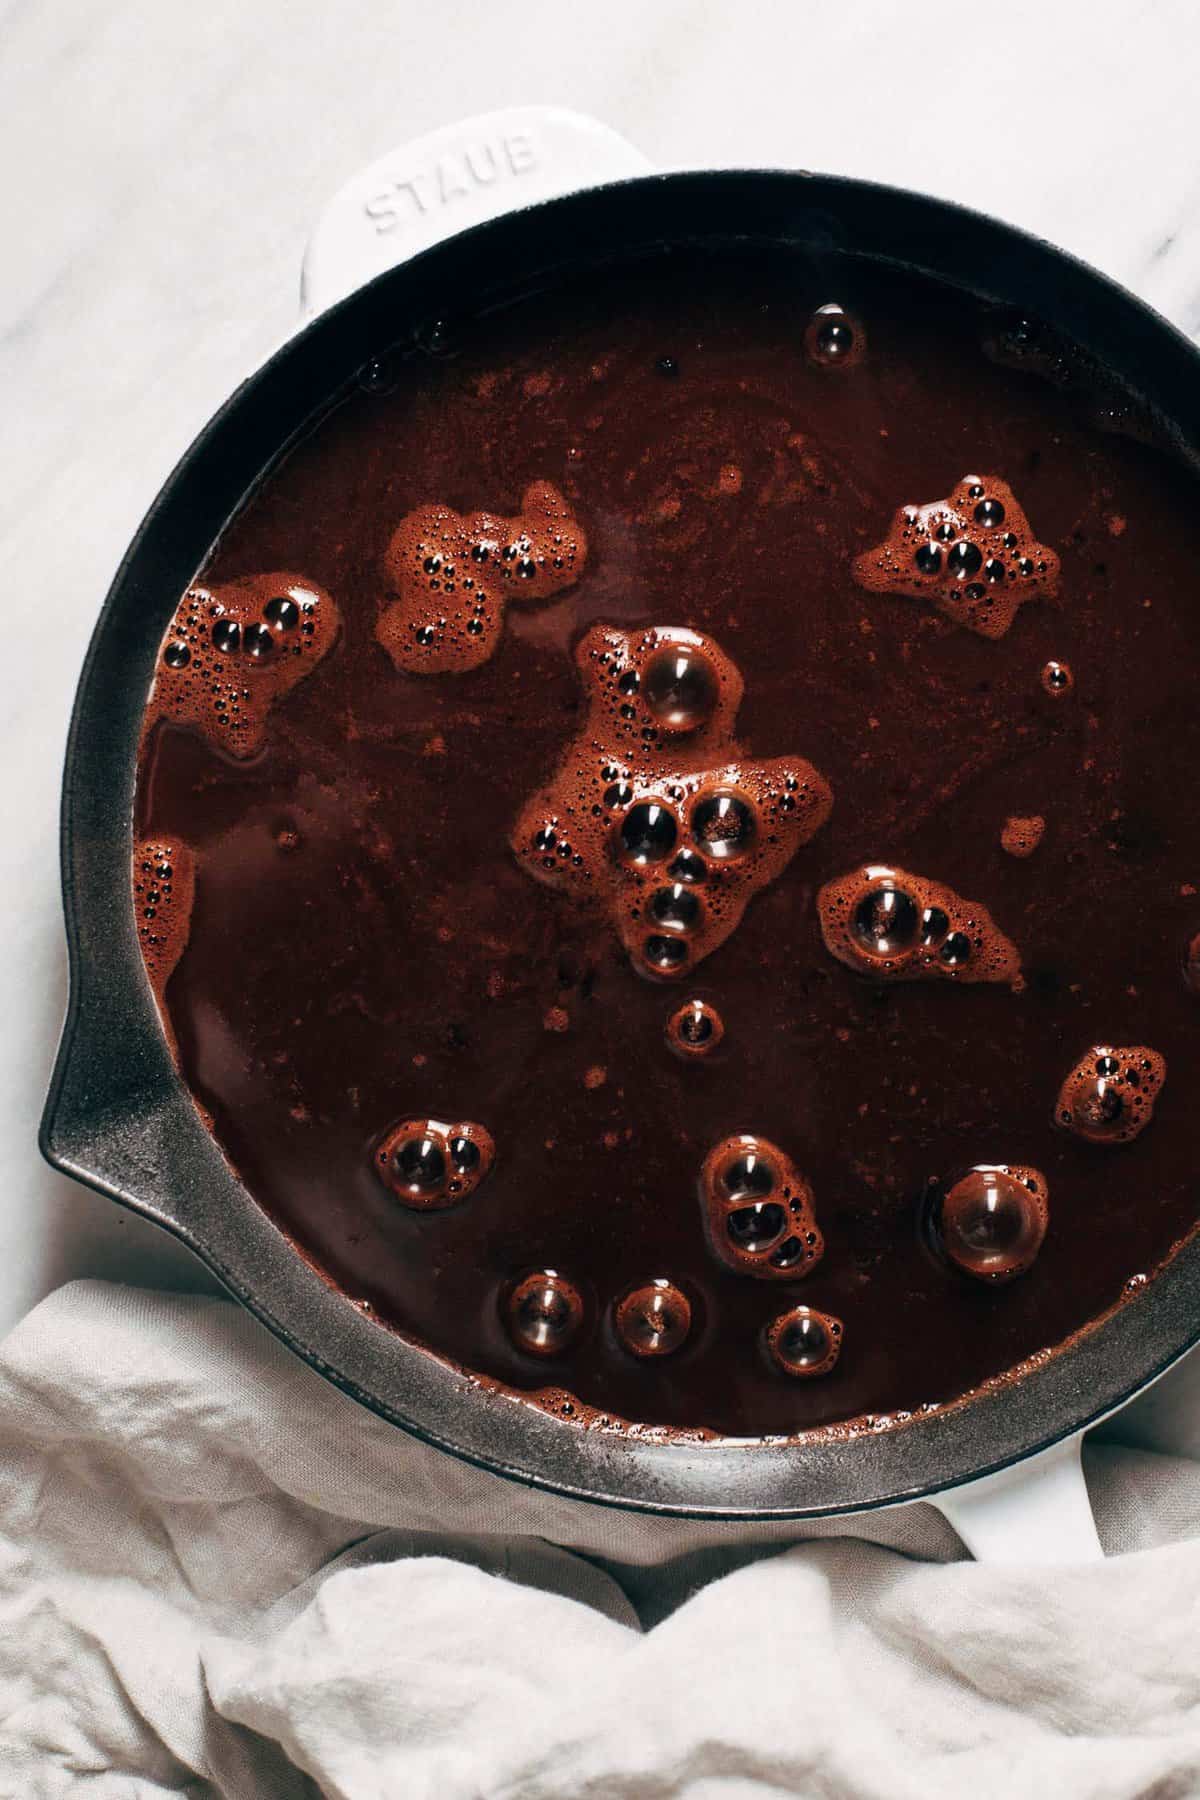 boiling water poured on top of chocolate cake batter in a skillet